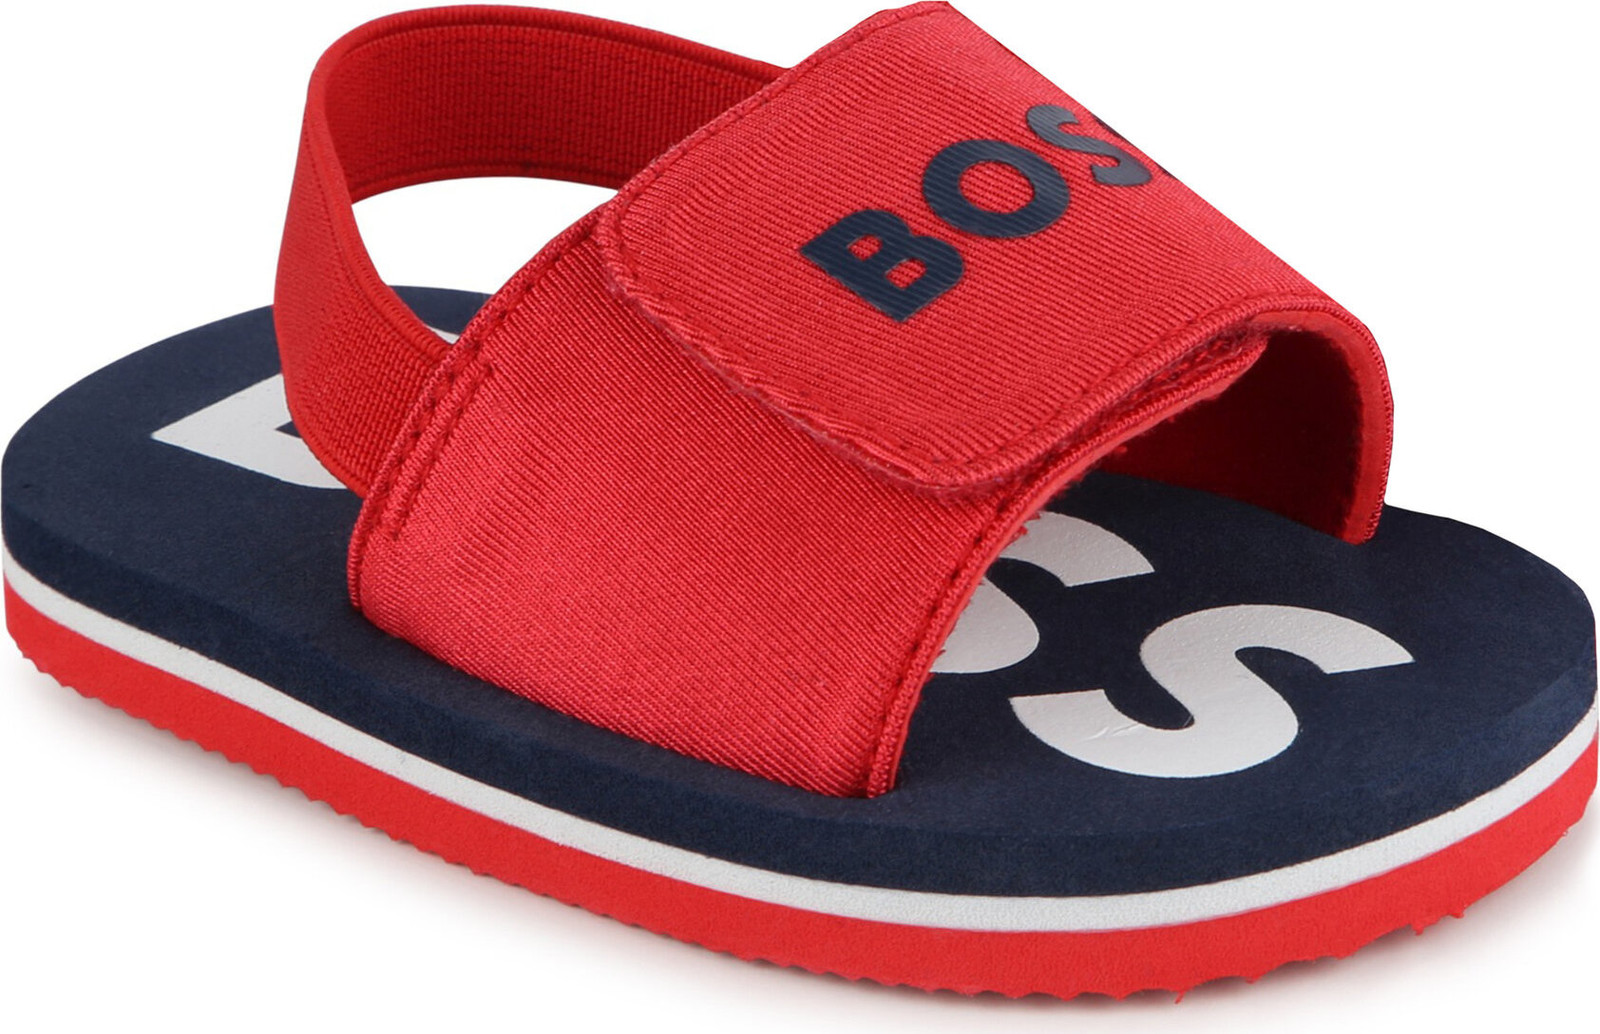 Sandály Boss J50889 M Bright Red 997